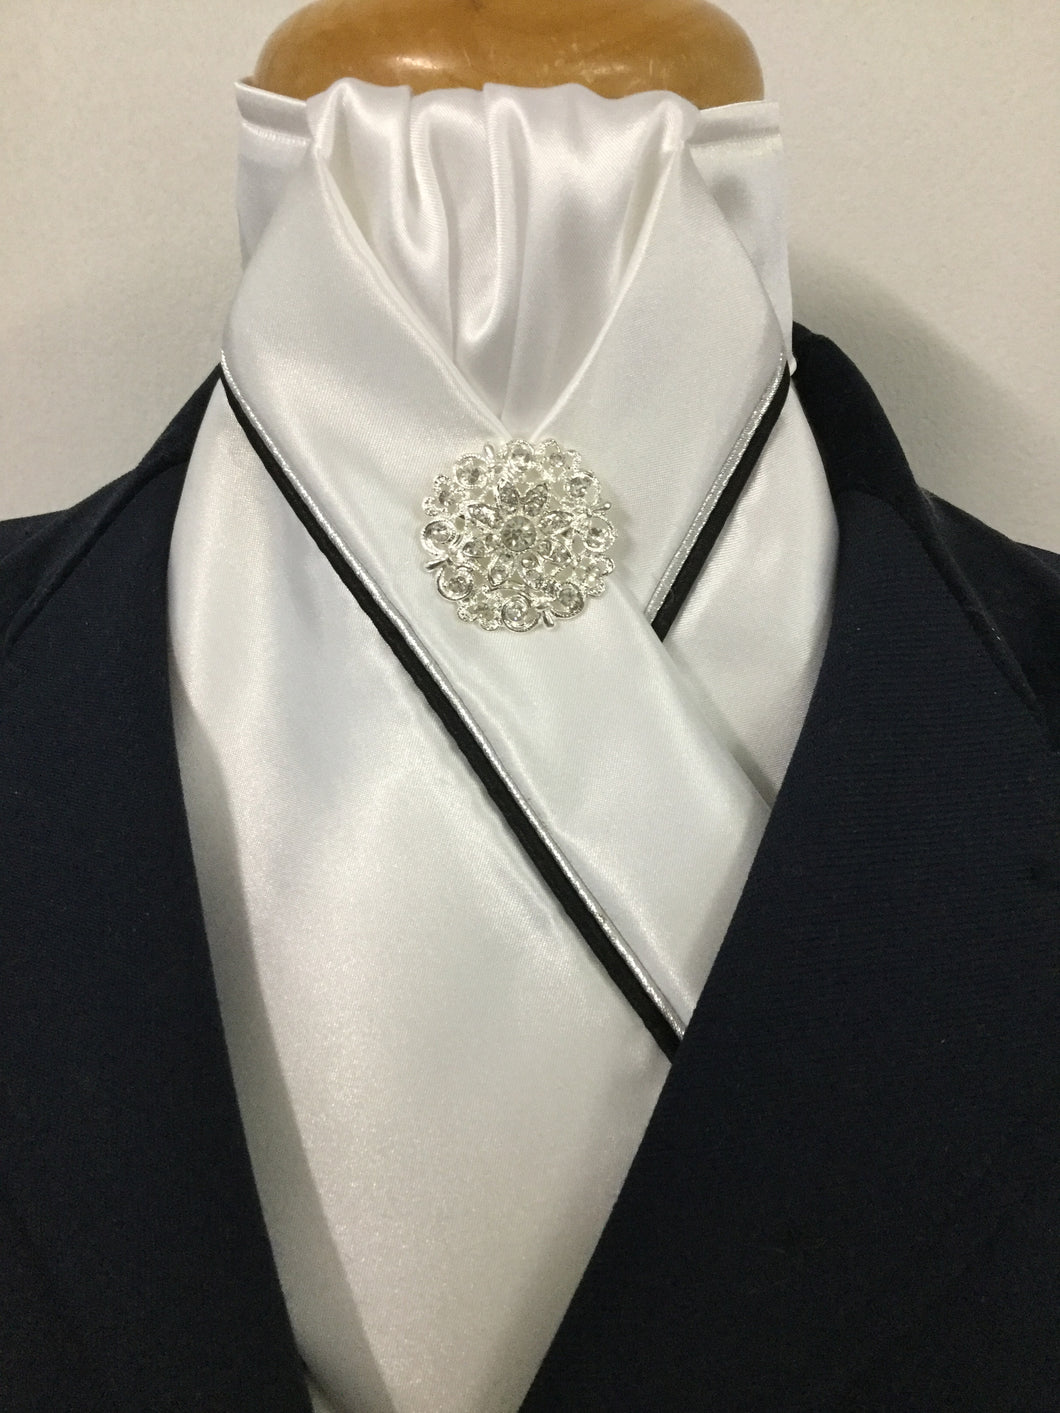 HHD White Satin Pretied Stock Tie with Silver & Black Piping